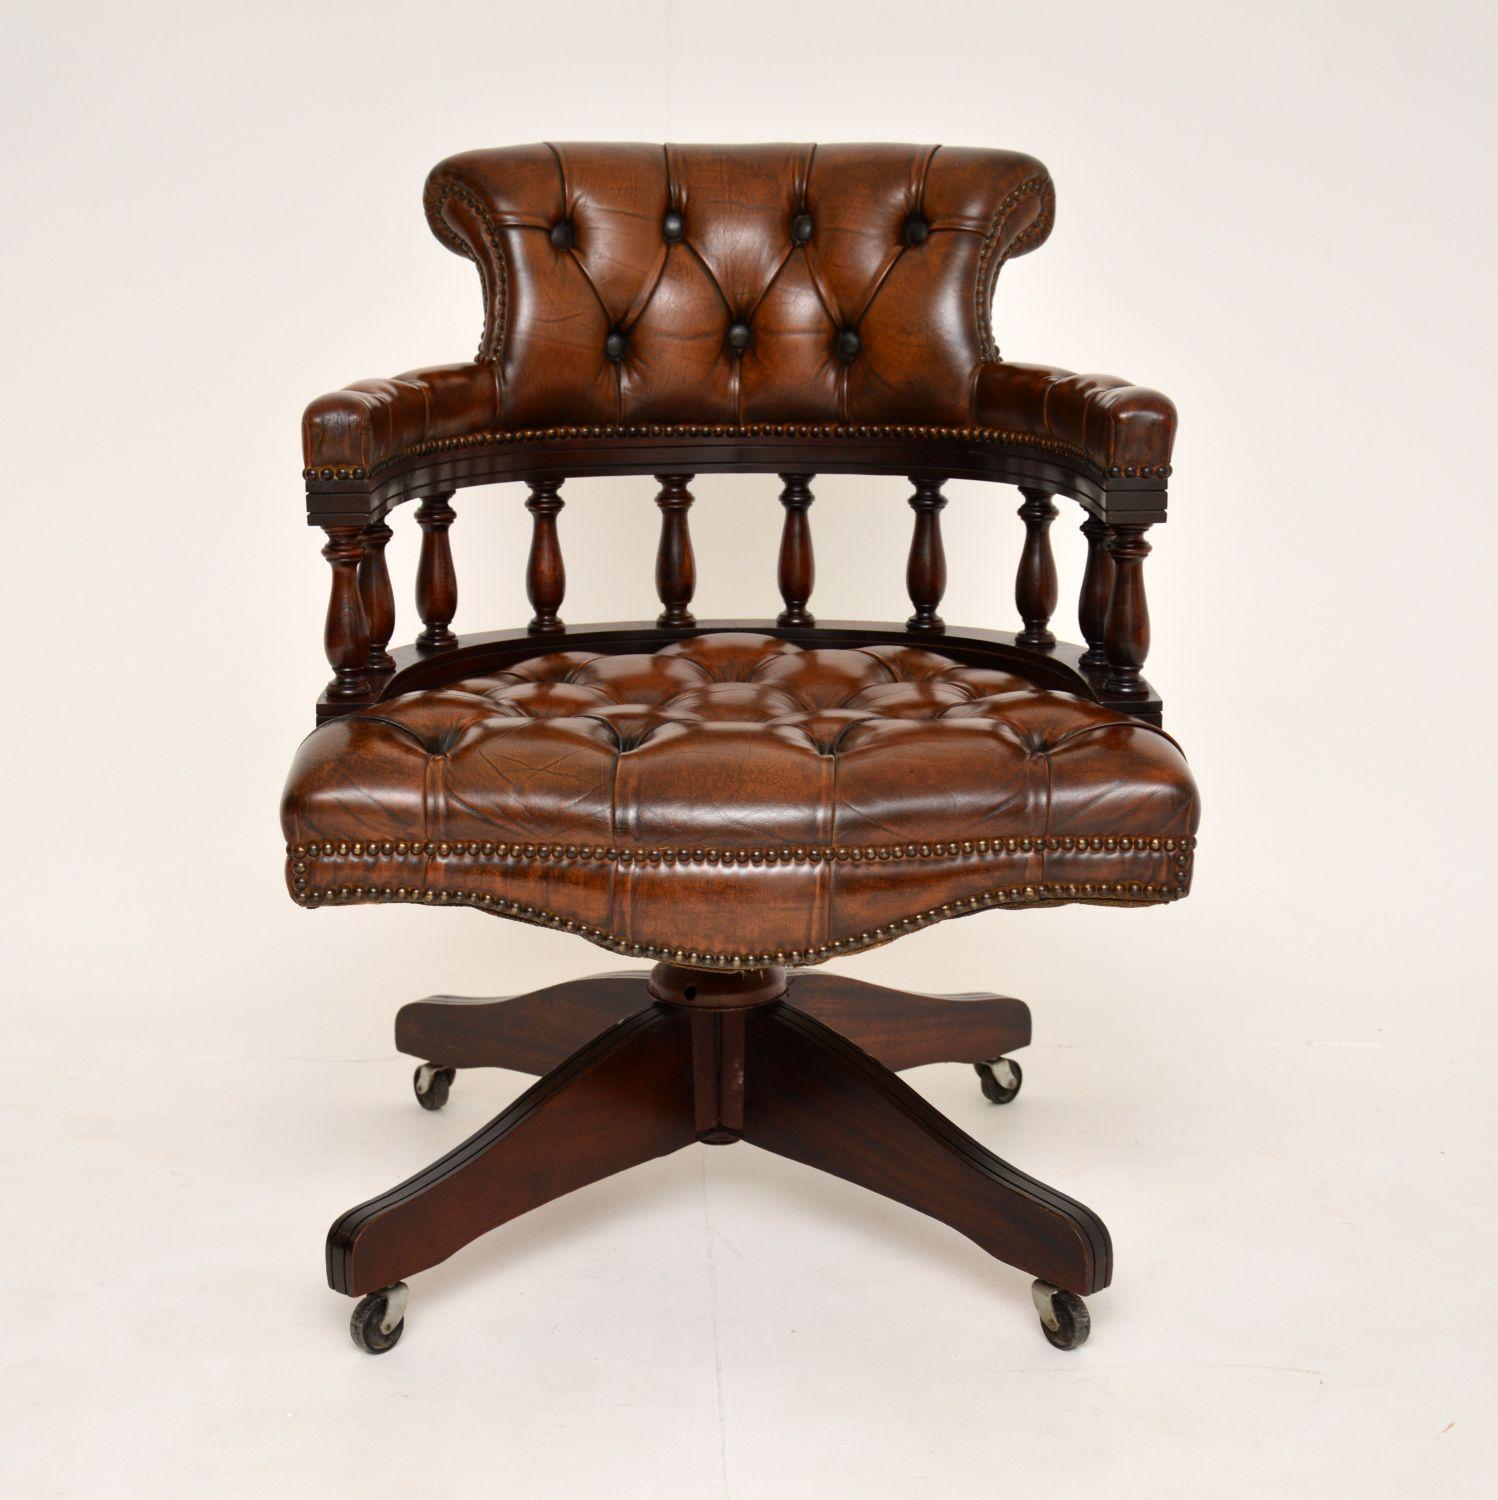 A lovely antique Victorian style leather captains desk chair. This was made in England, it dates from around the 1950-60’s.

It is very well made and comfortable, with beautiful brown deep buttoned leather upholstery. It swivels smoothly on the